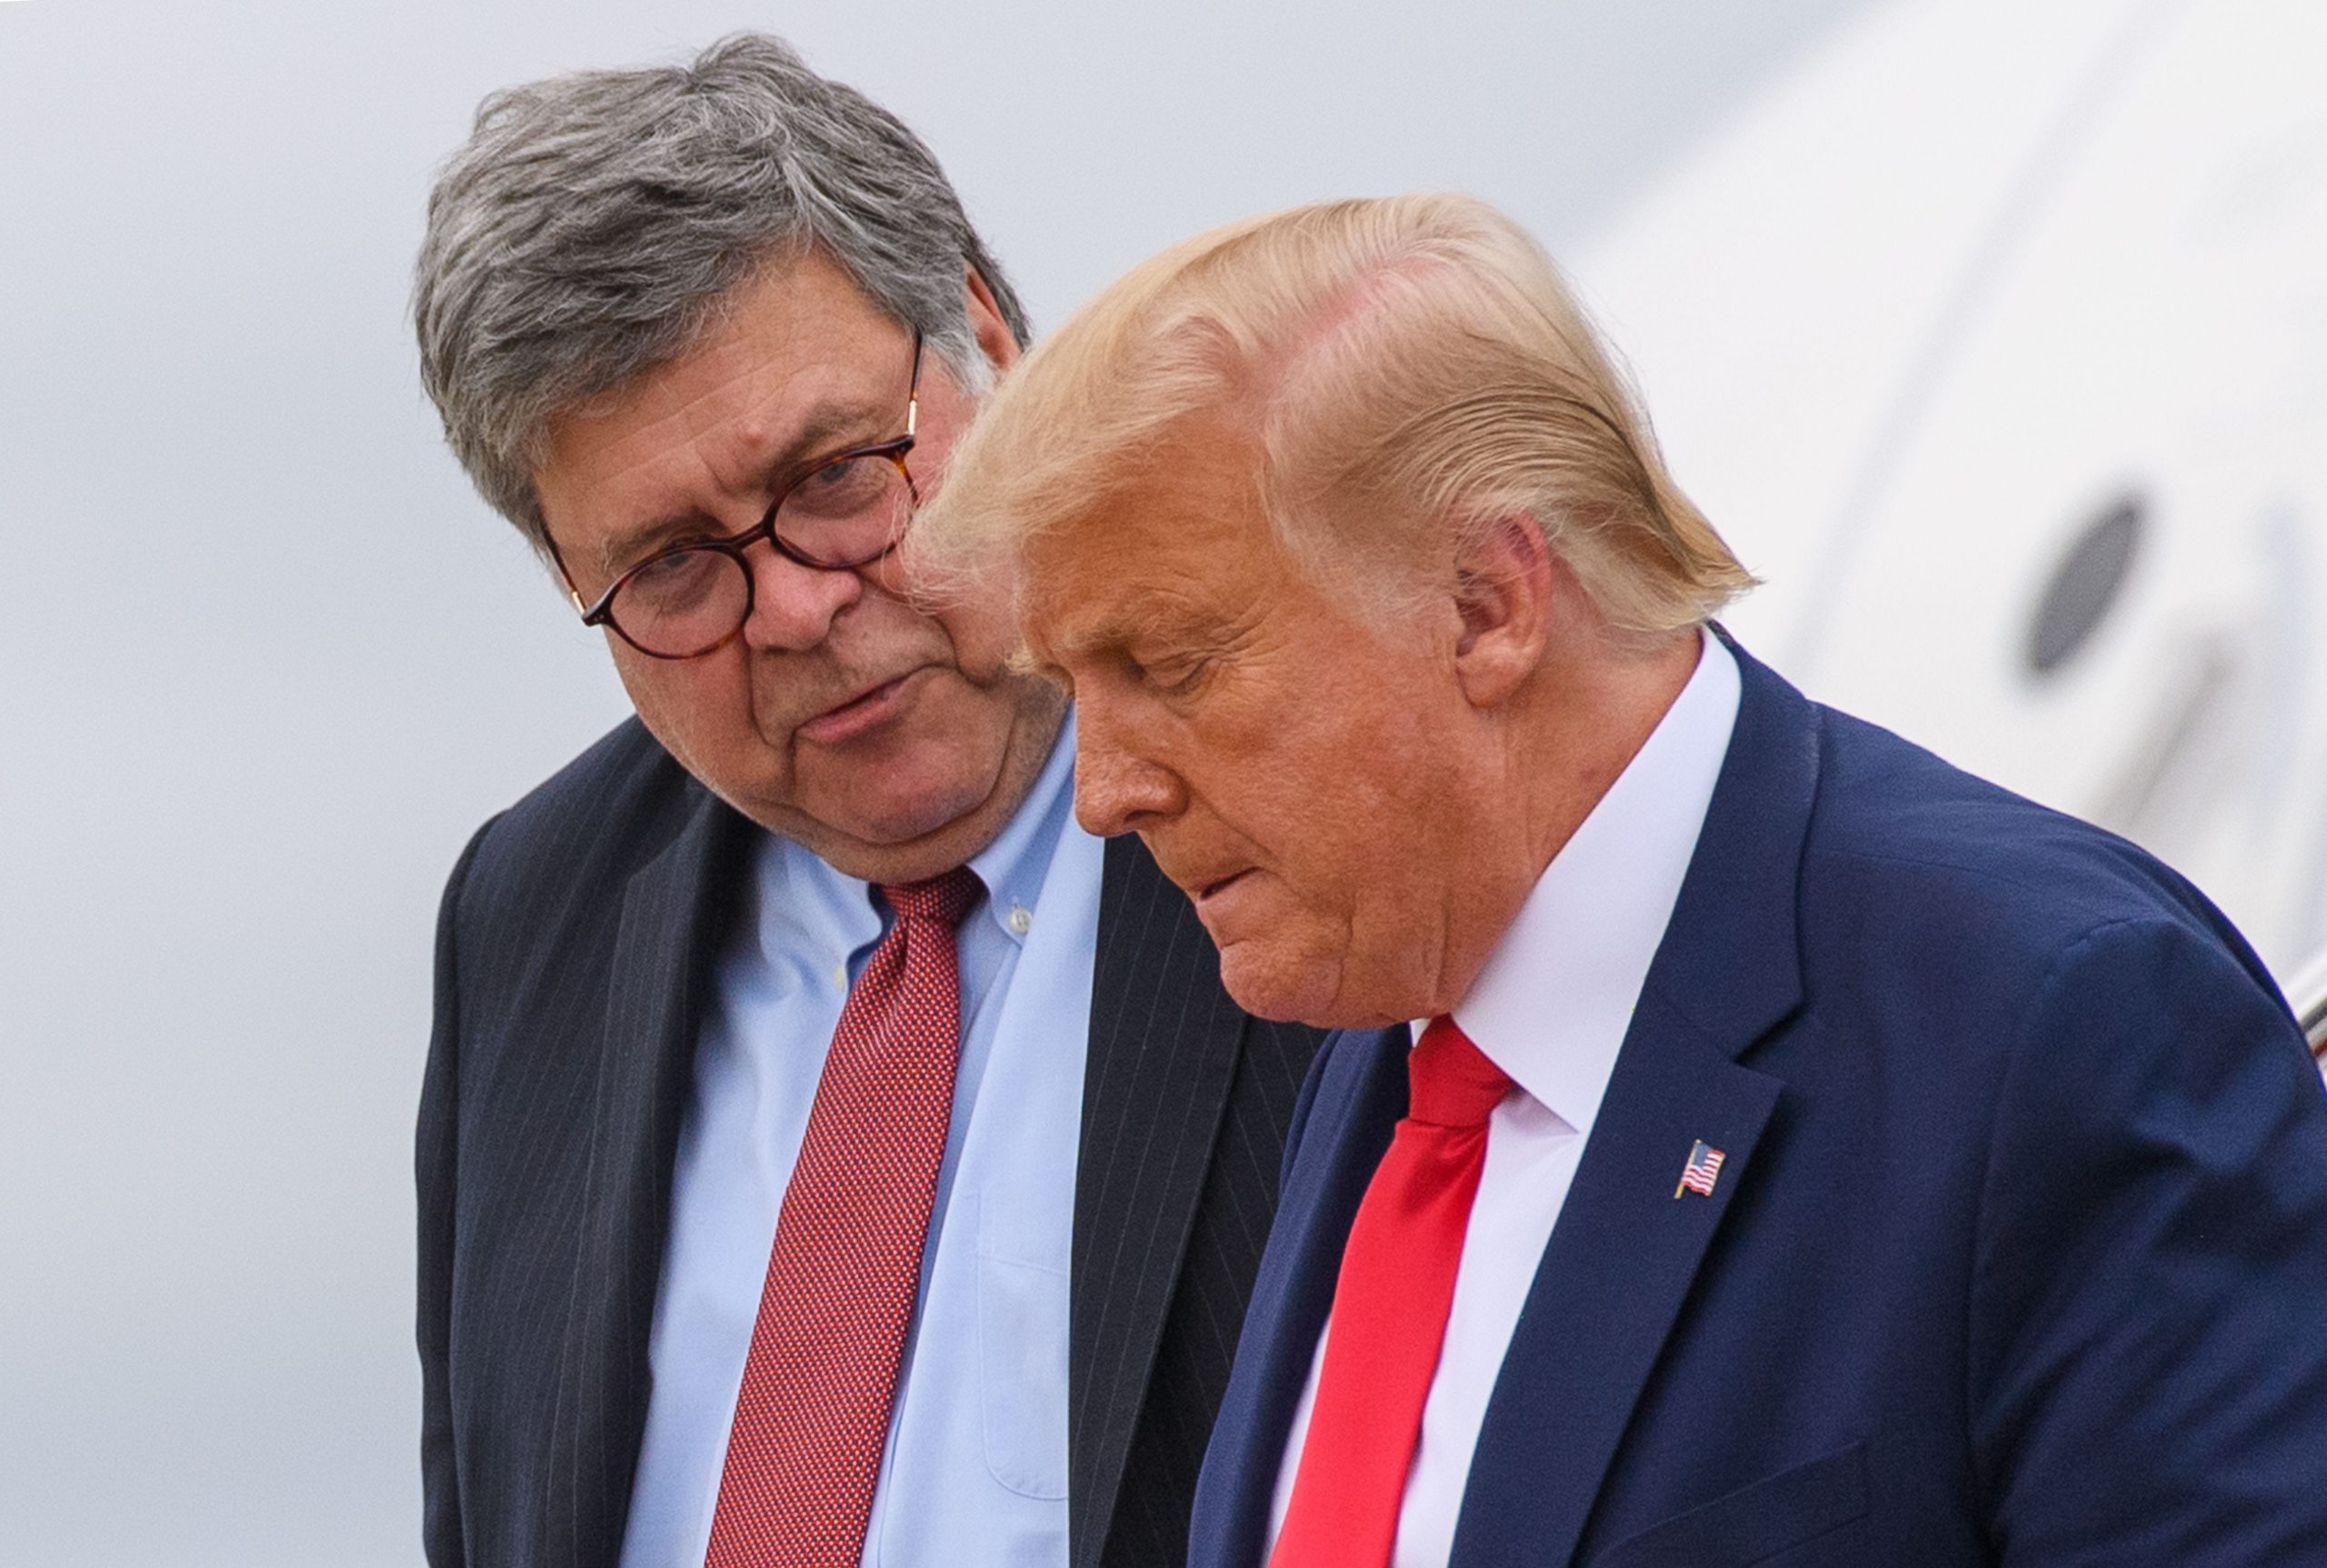 US President Donald Trump (R) and US Attorney General William Barr step off Air Force One upon arrival at Andrews Air Force Base in Maryland on September 1, 2020